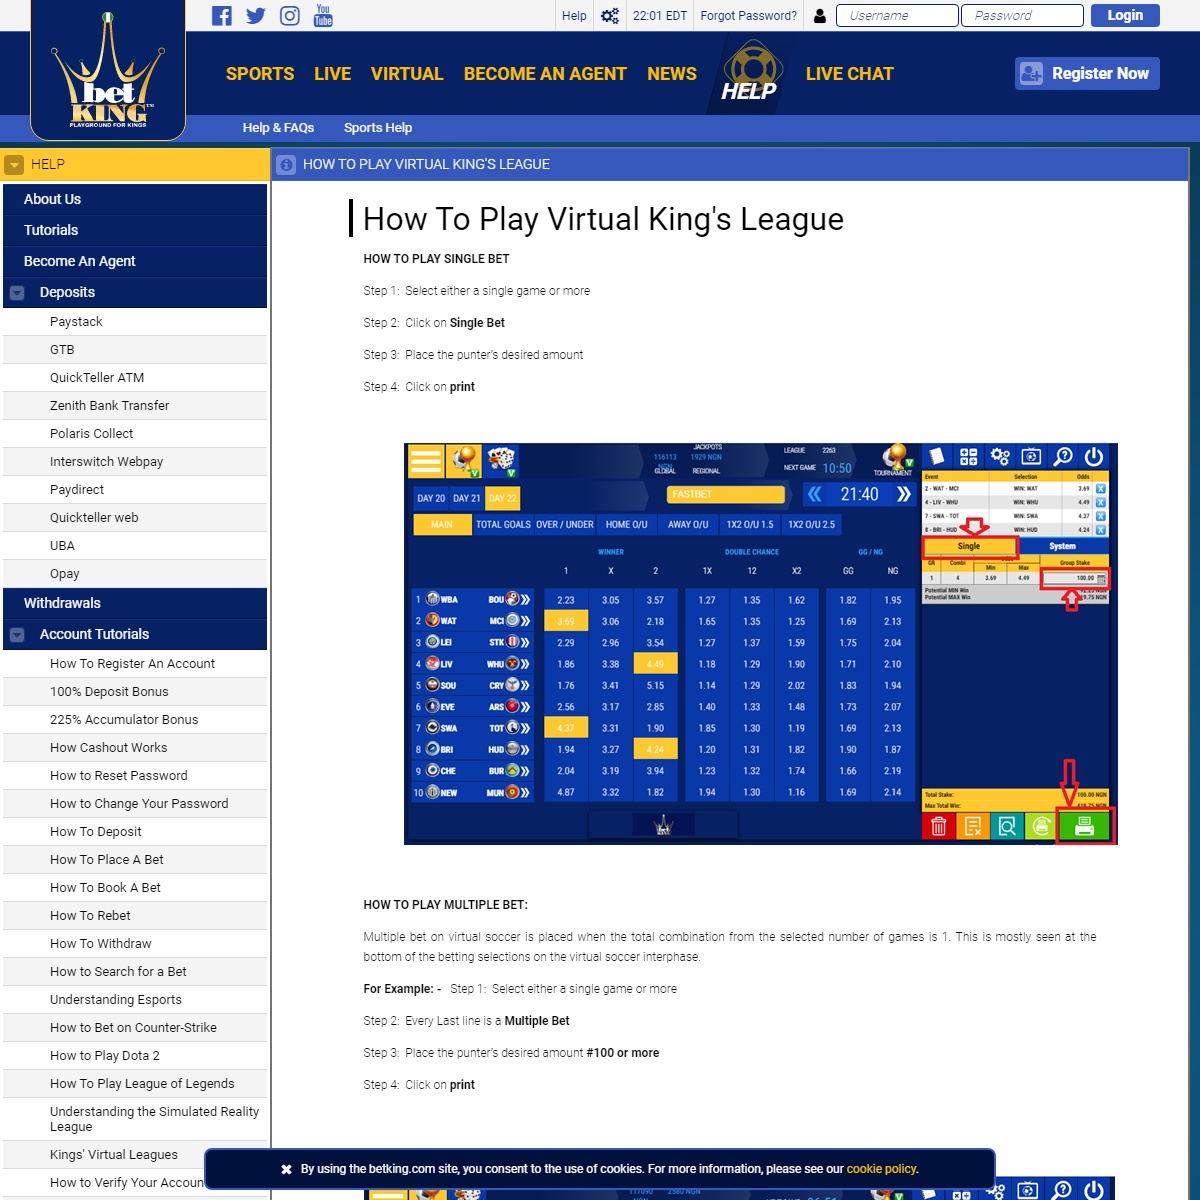 A complete backup of https://www.betking.com/help/general-help/account-tutorials/how-to-play-virtual-kings-league/